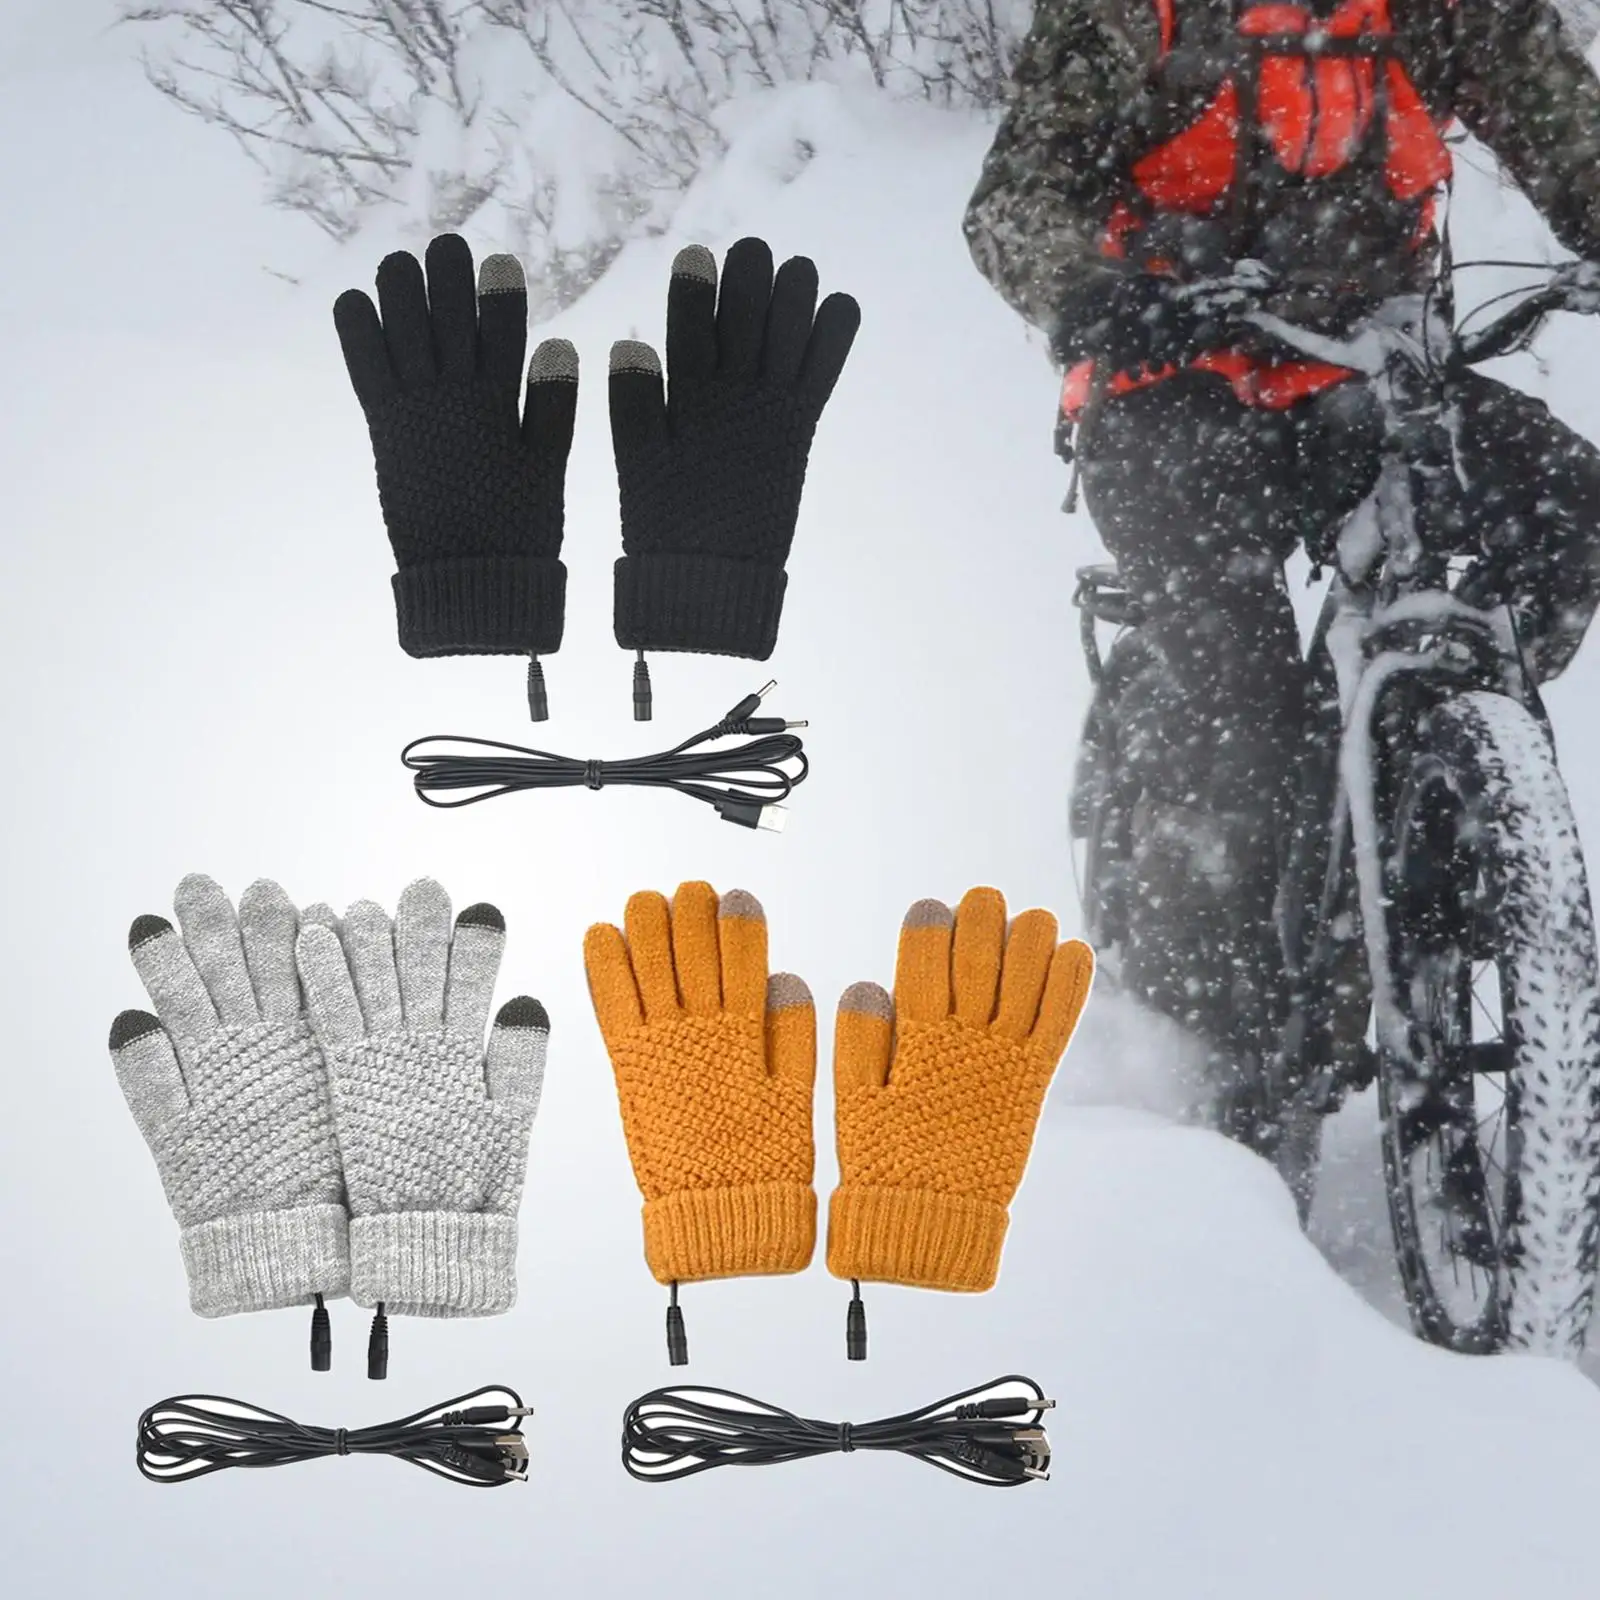 USB Heated Gloves Electric Washable Warm Full Finger Stretchy Warm Gloves Hands Warmer for Typing Skiing Cycling Hiking Outdoor